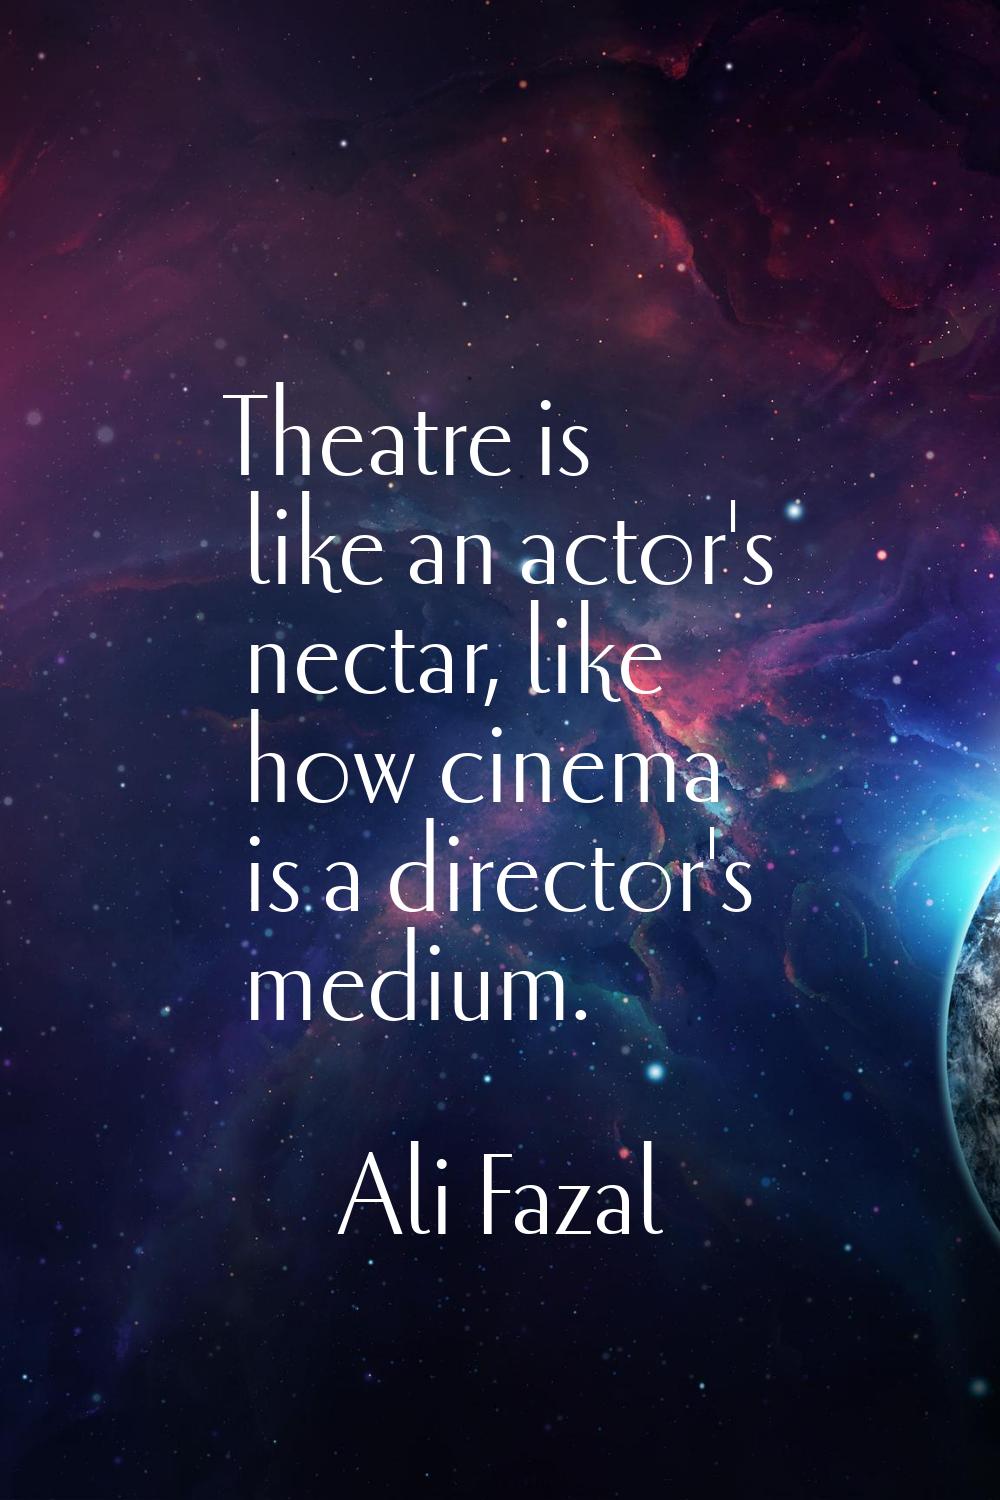 Theatre is like an actor's nectar, like how cinema is a director's medium.